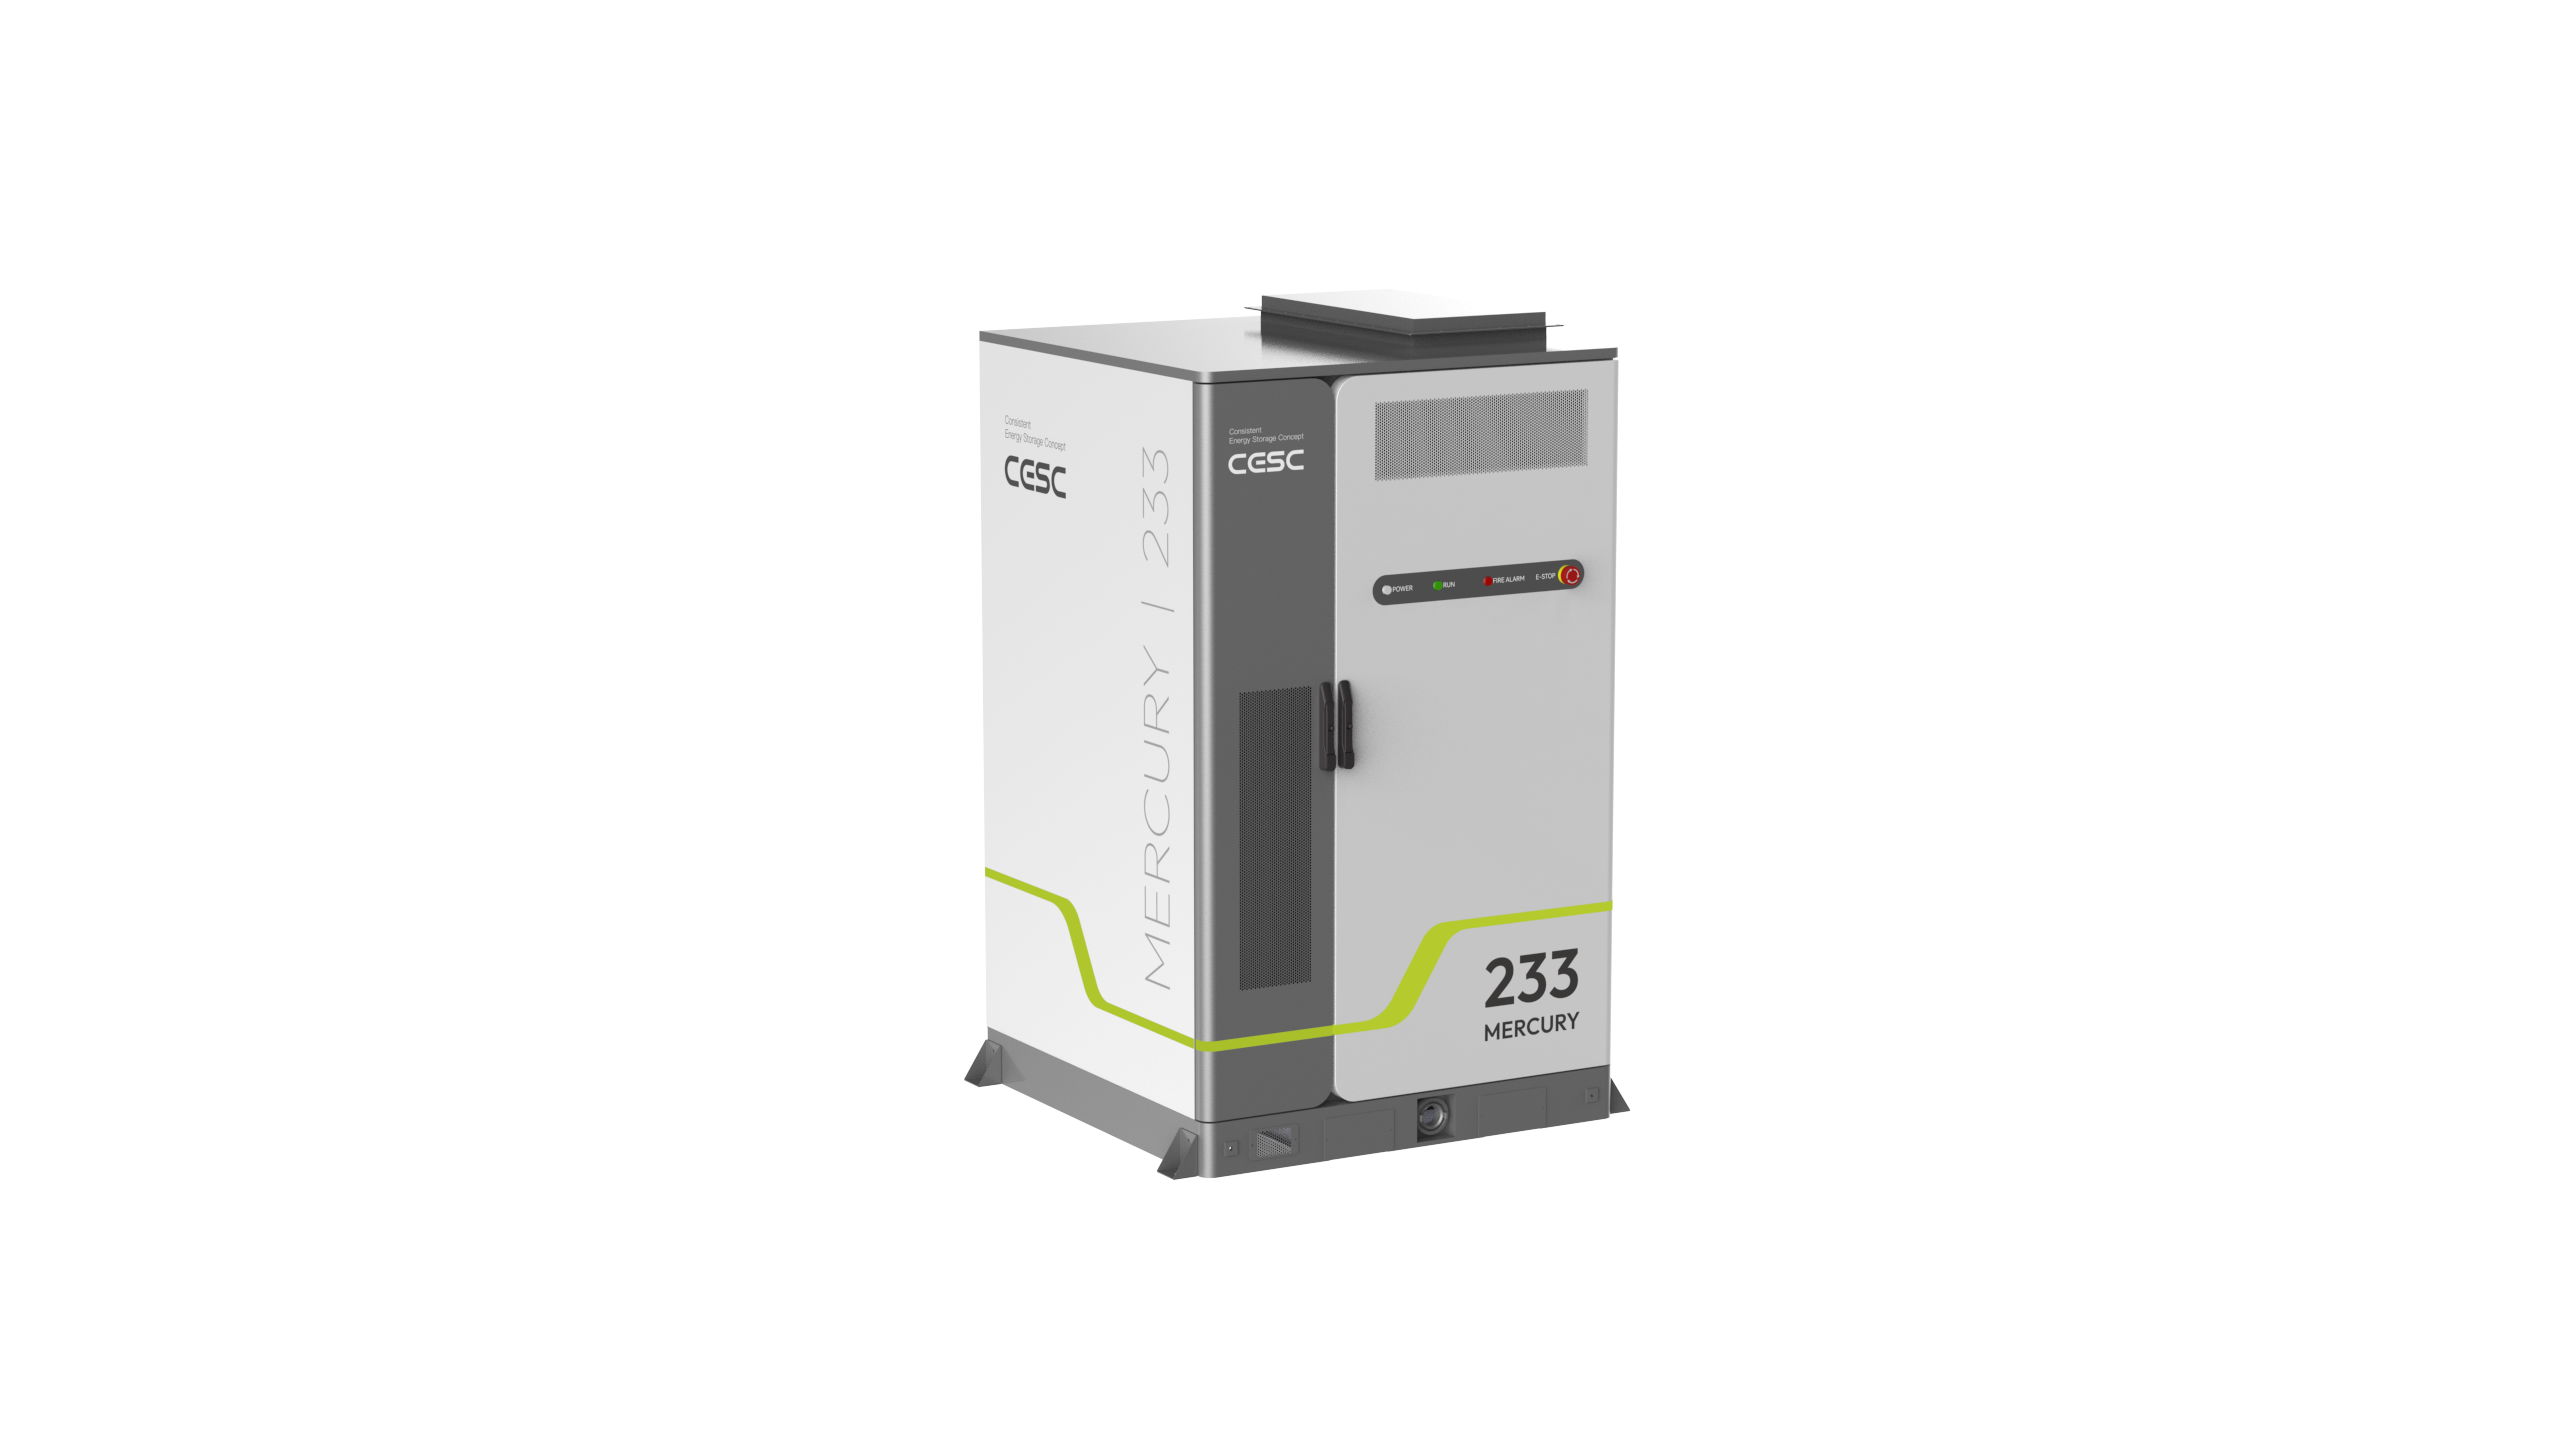 Mercury 233 - Industrial & Commercial Energy Storage System